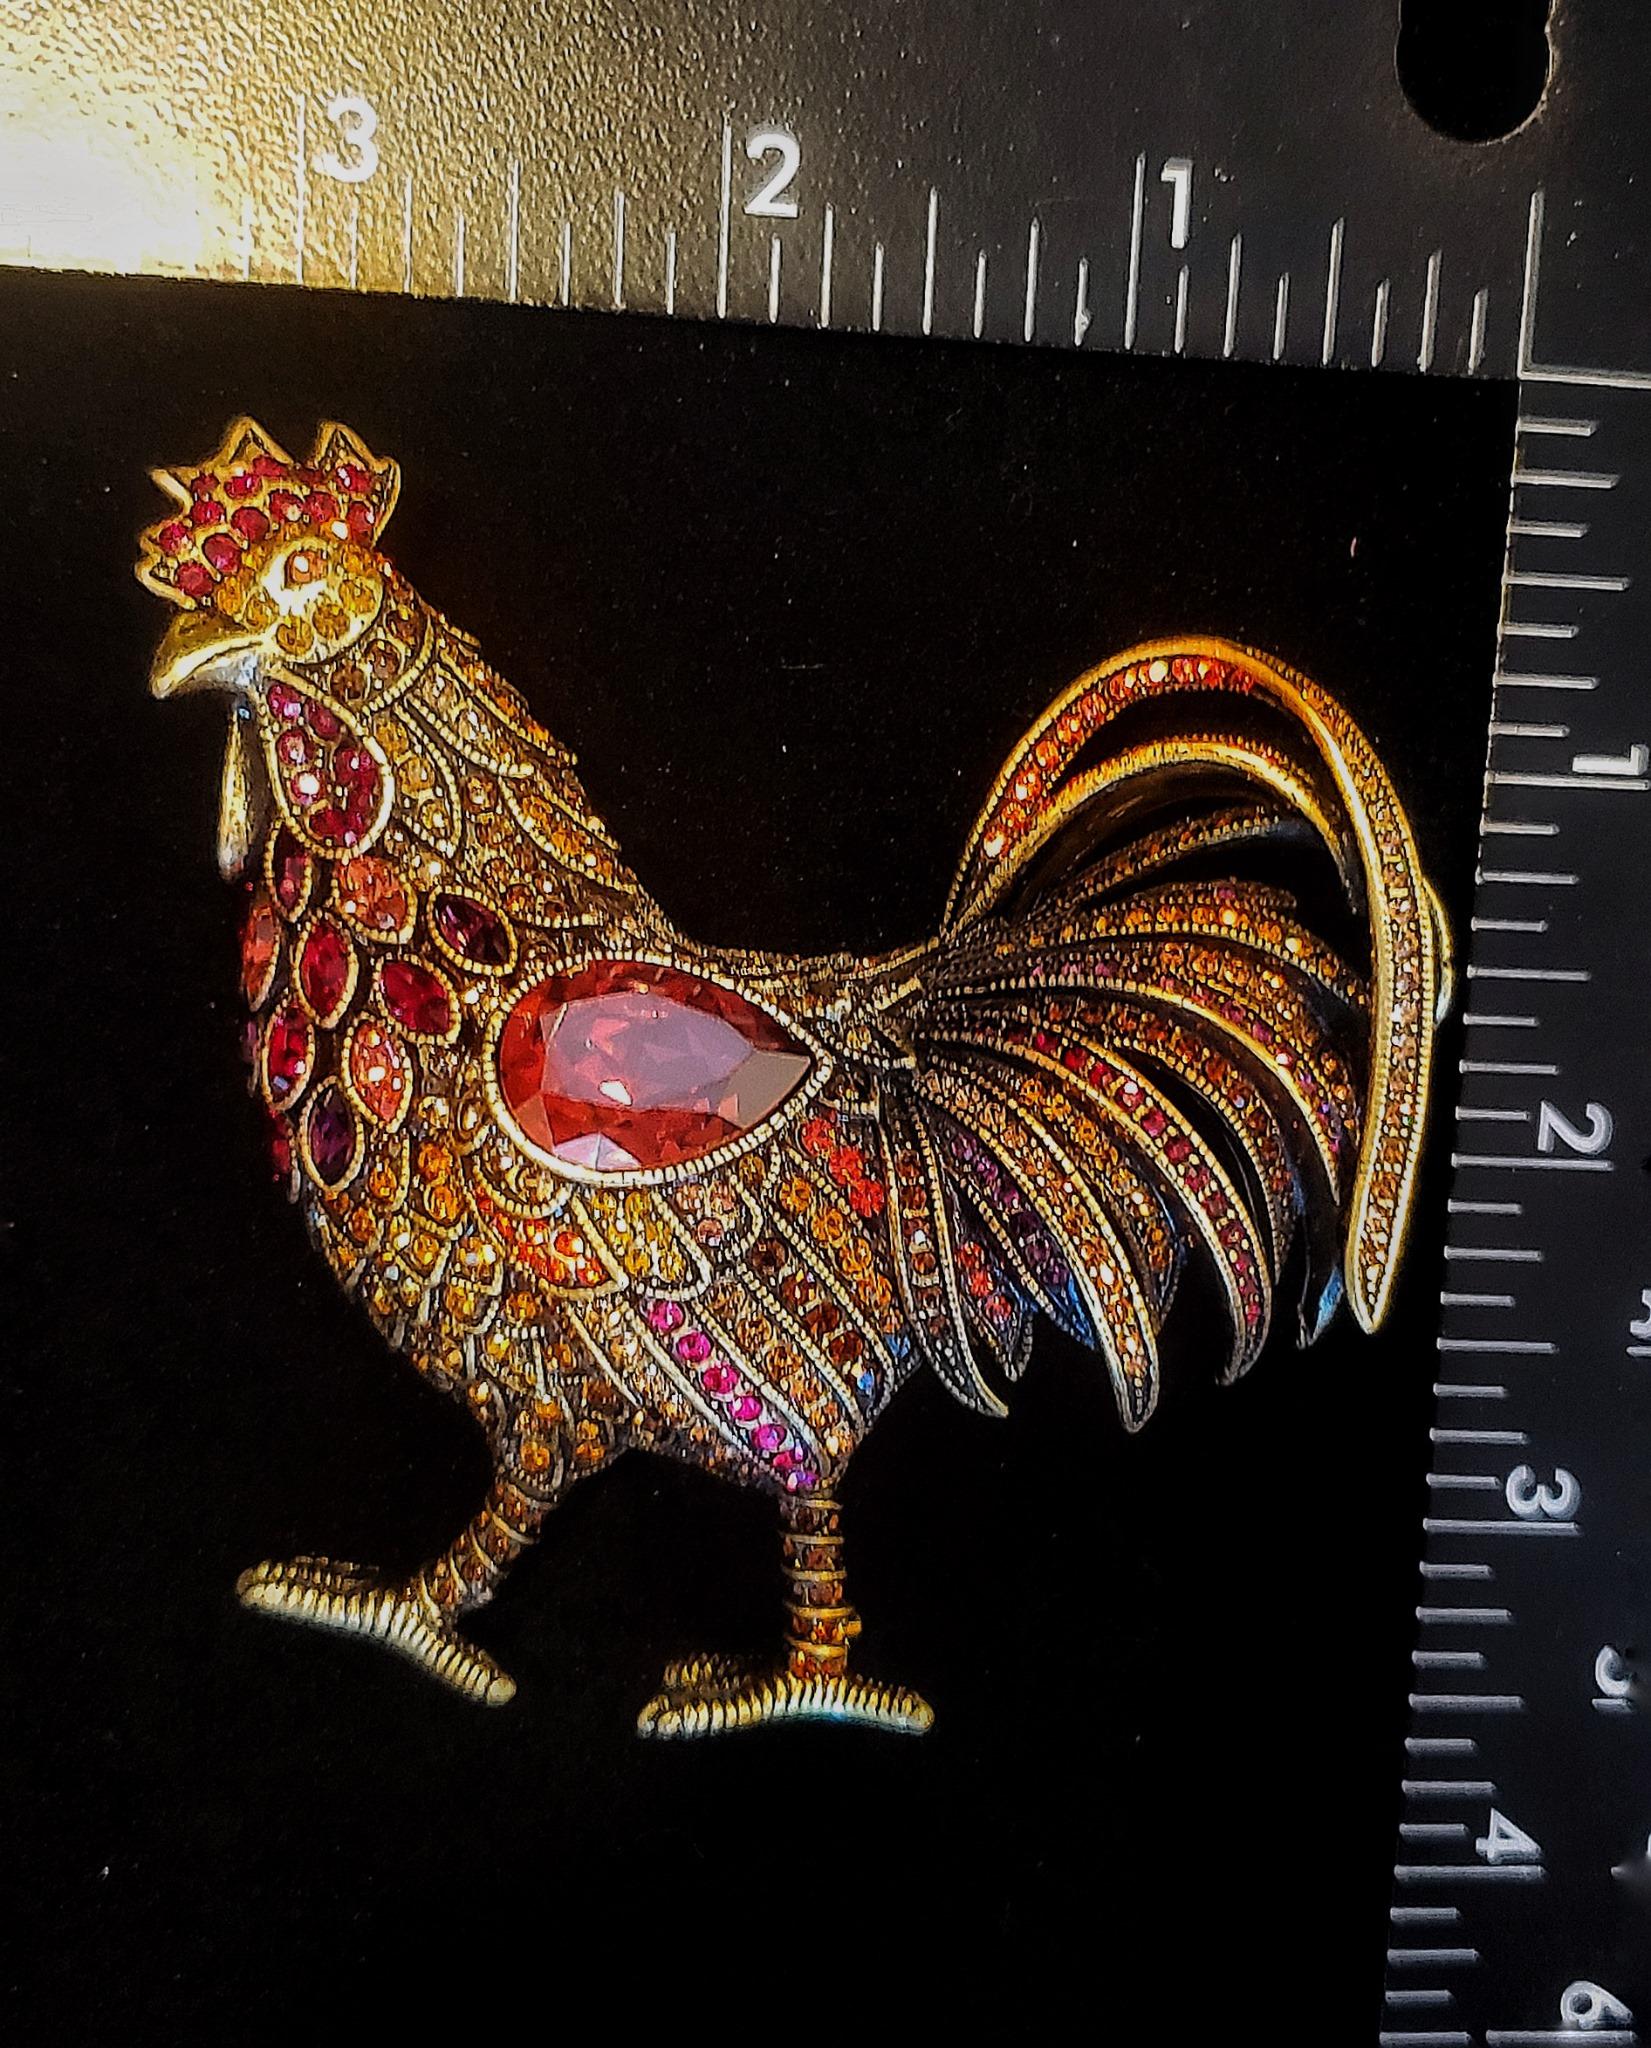 Celebrate the dawning of a new day with this sparkling rooster designed pin. This cute little creature covered in colorful crystals brings a fresh, playful scene.

Measurements:
3 3/8